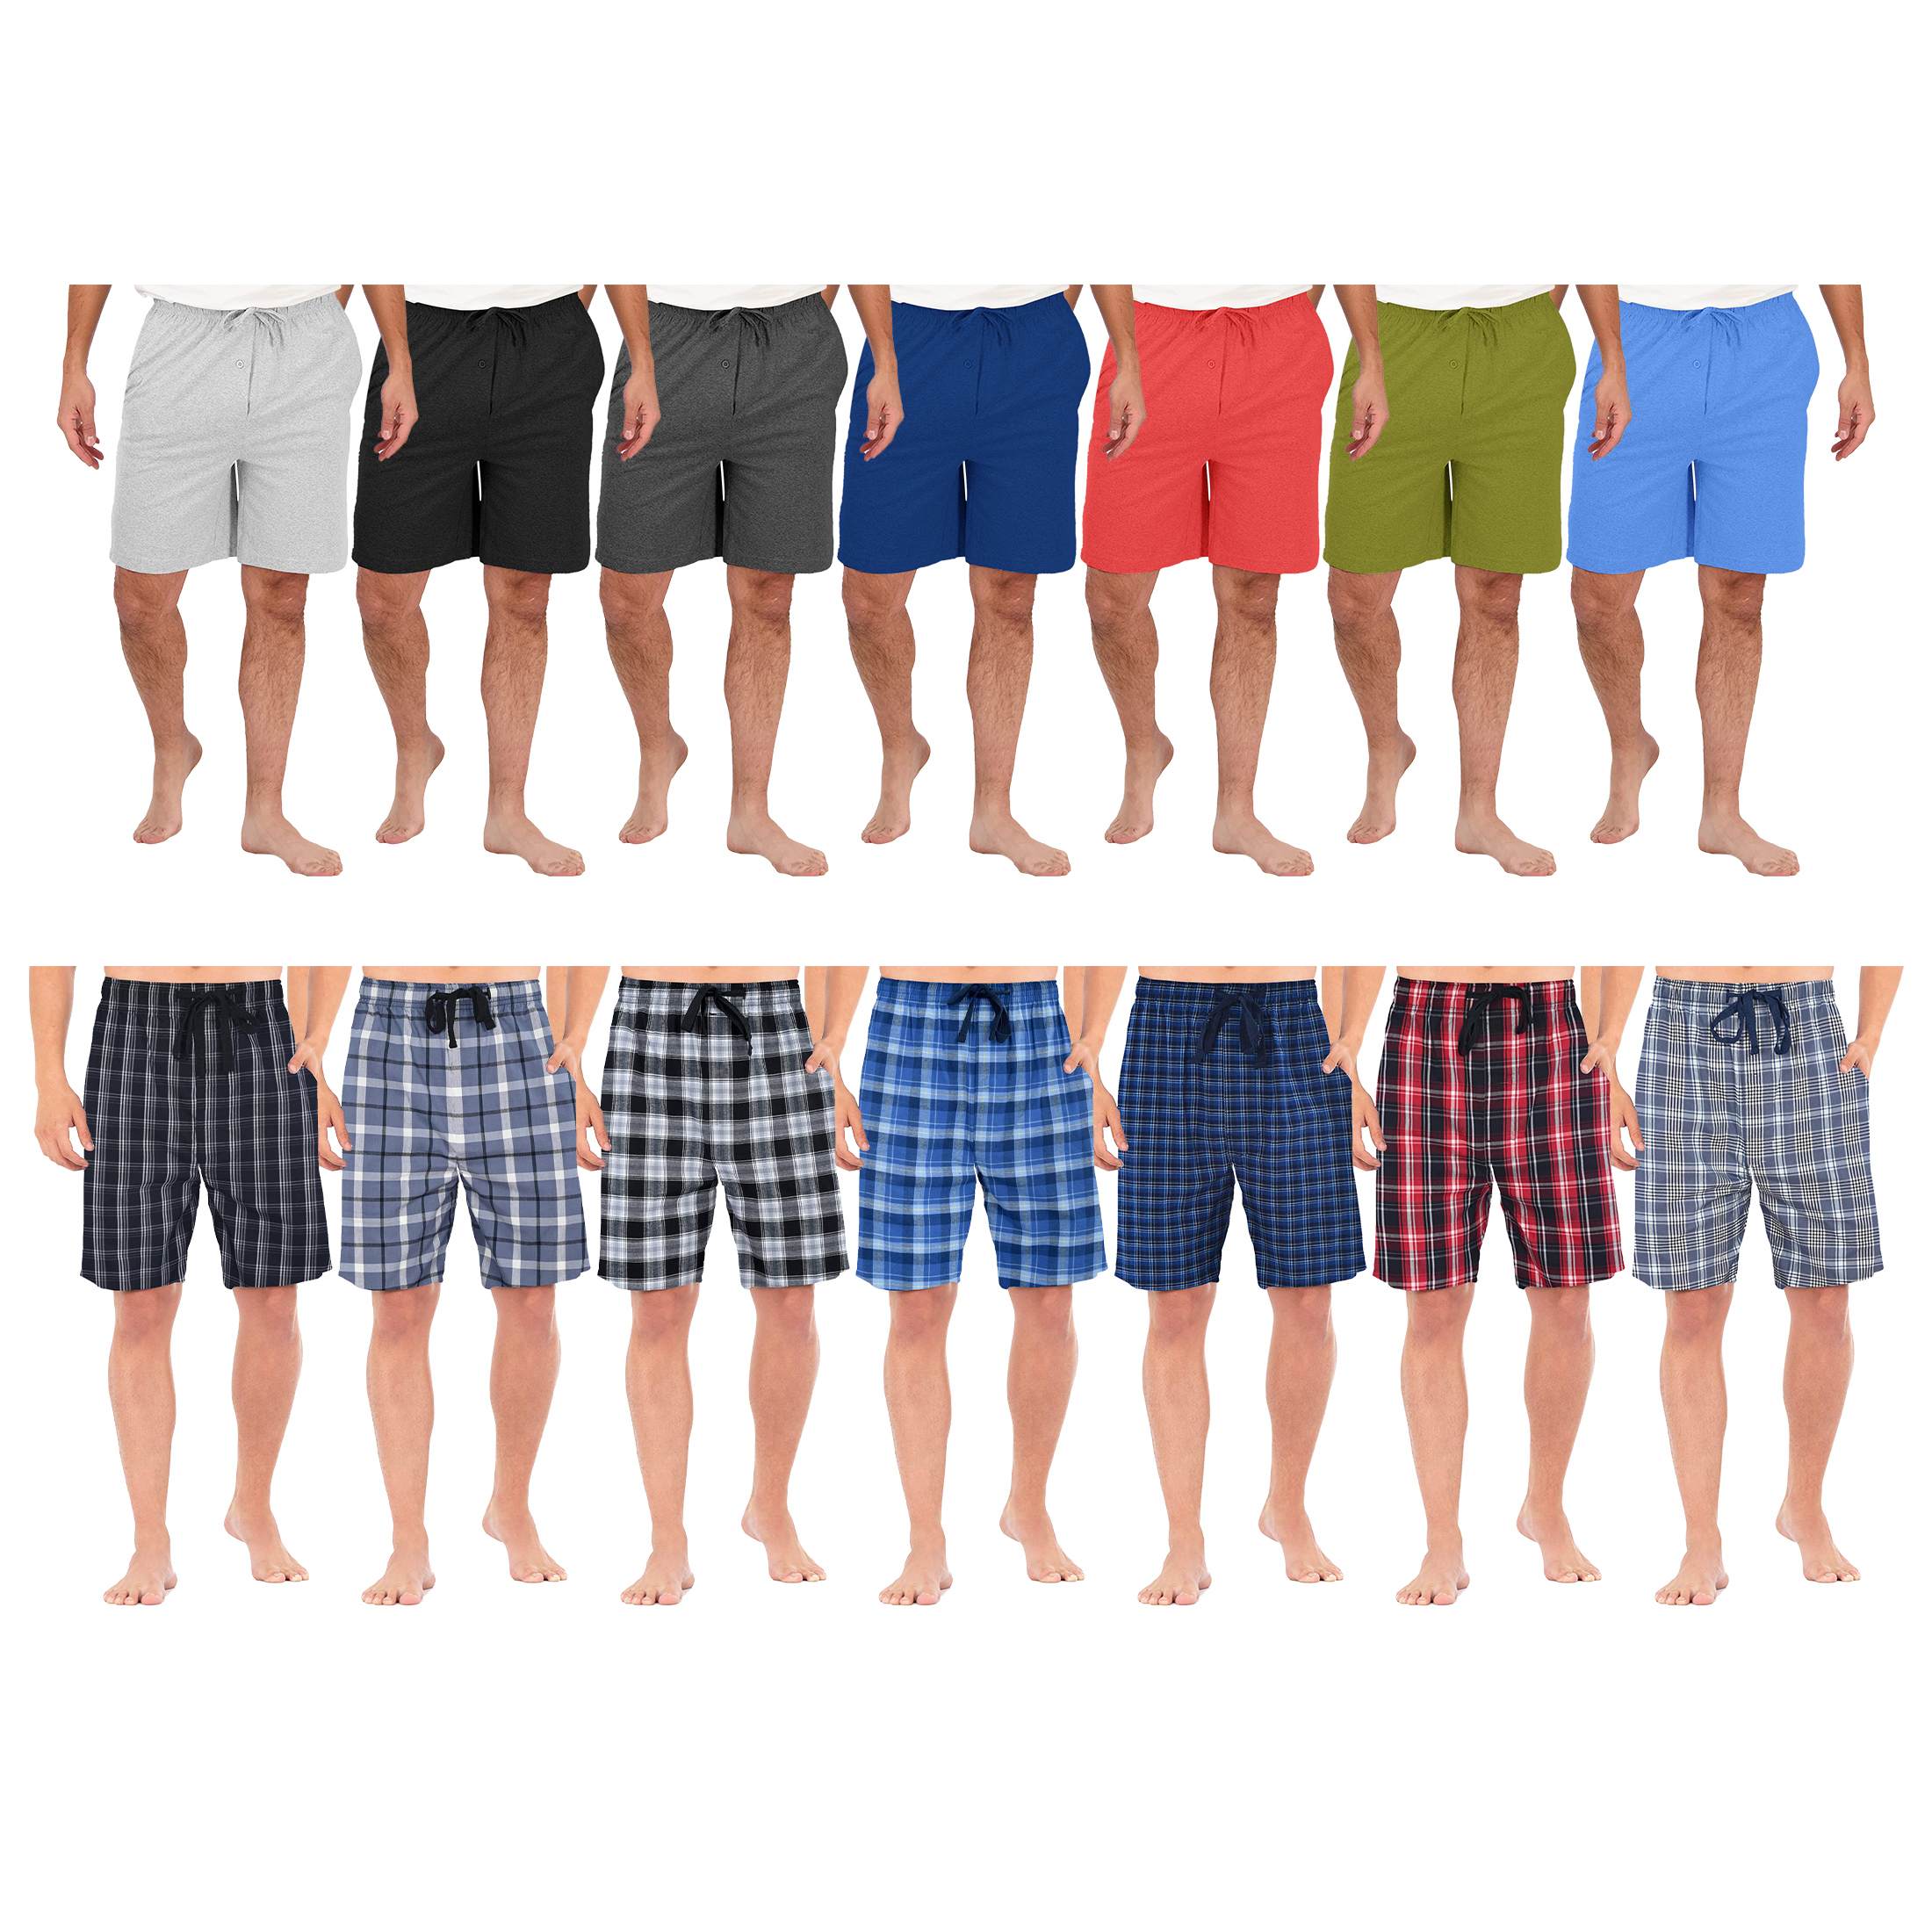 Multi-Pack: Men's Ultra-Soft Jersey Knit Sleep Lounge Pajama Shorts For Sleepwear - Solid, 1 Pack, X-Large